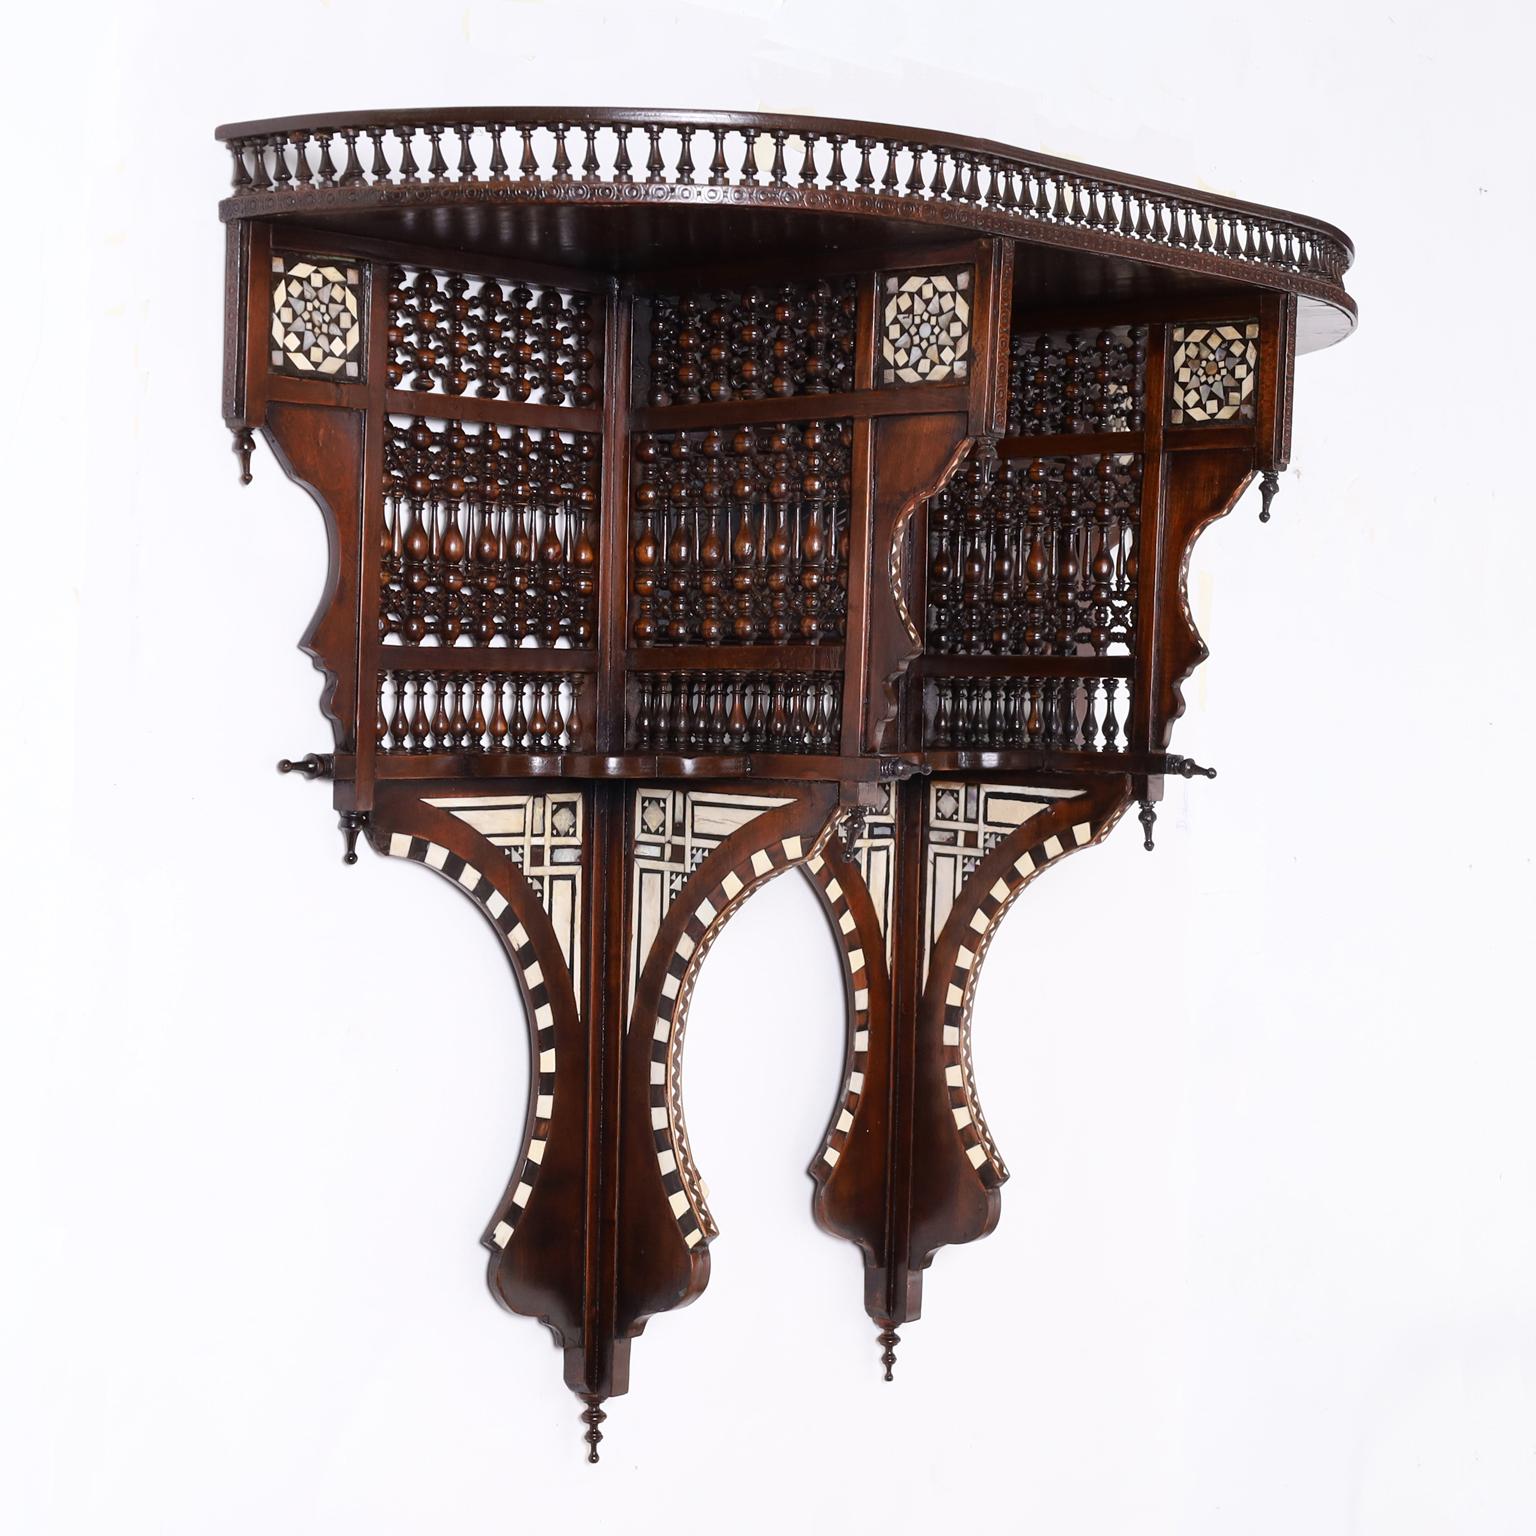 Impressive antique near eastern wall shelf crafted in walnut and featuring bone, mother of pearl, and ebony floral and geometric inlays, a gallery, balustrades, stick and ball finials, and moorish arches. 